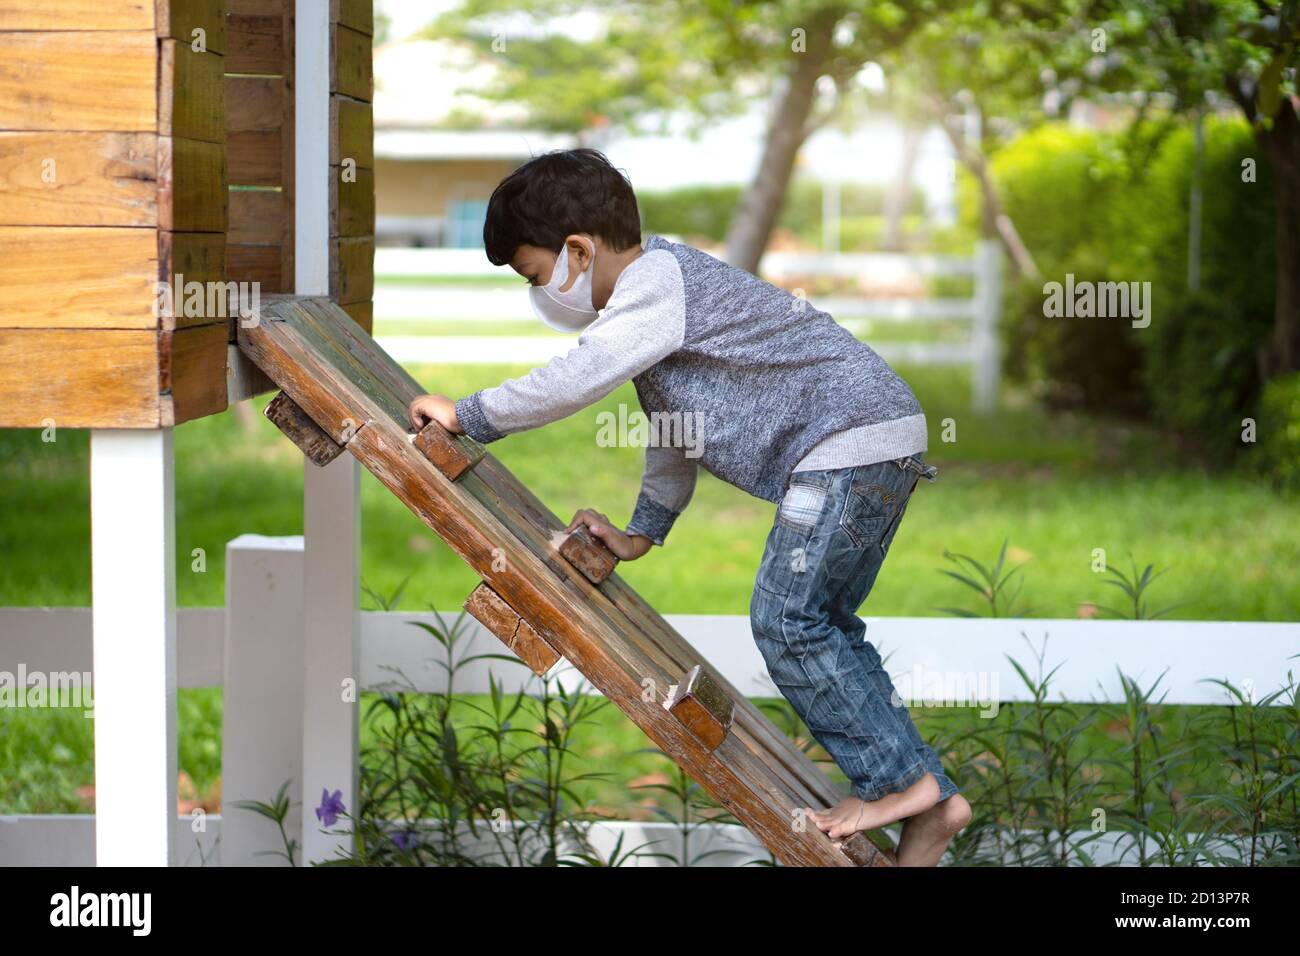 4-5 years old Asian Little boy climbing ladder on playground. Stock Photo